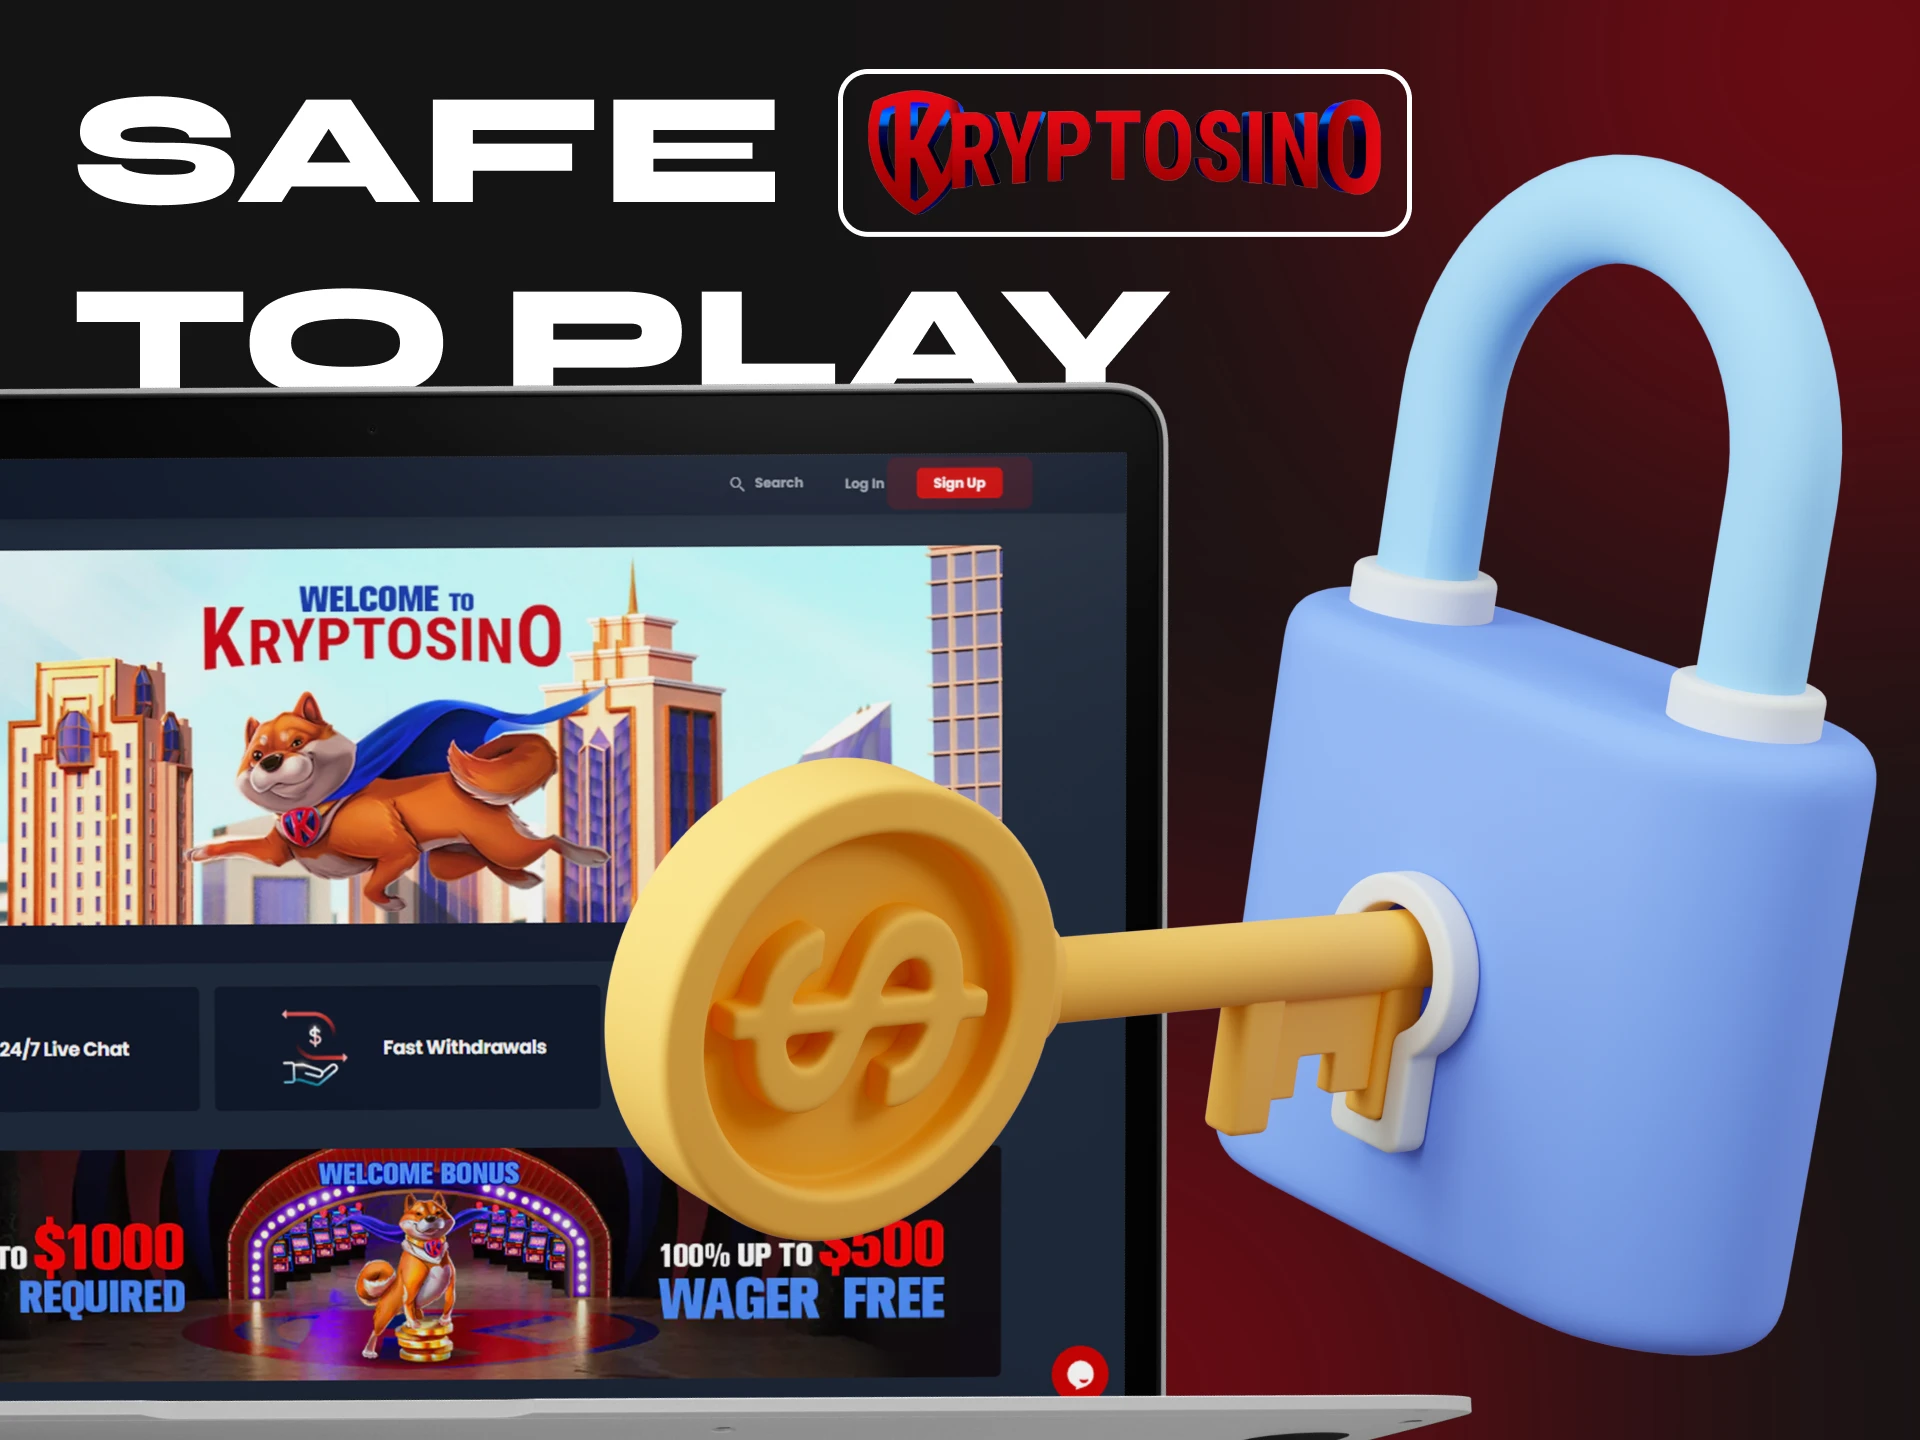 Kryptosino Casino takes strict measures to protect your privacy.